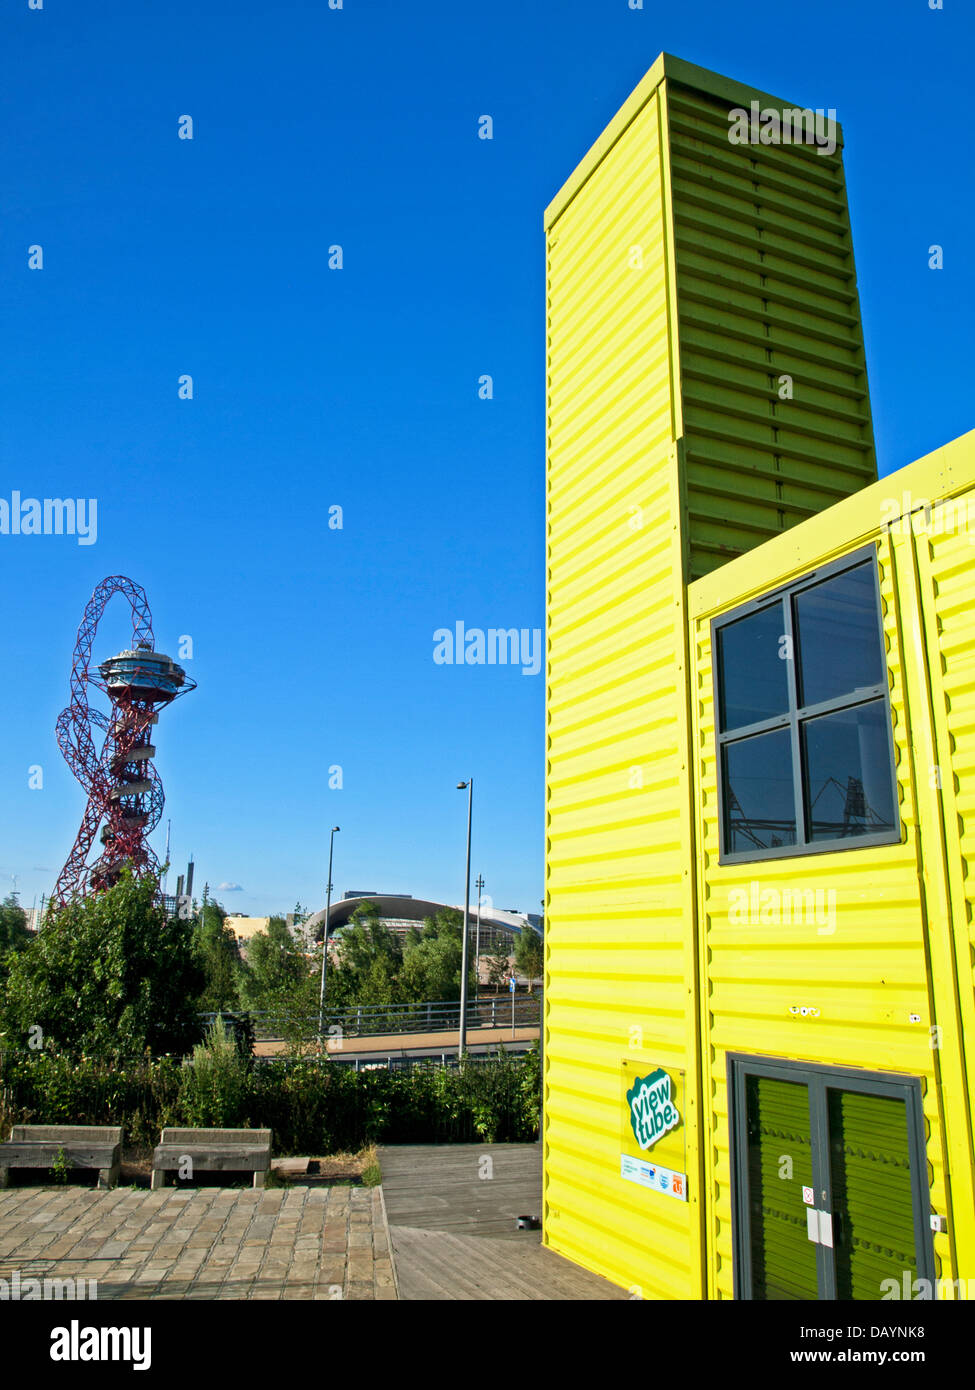 The View Tube cafe and the ArcelorMittal Orbit in the Olympic Park, Stratford, East London, England, United Kingdom Stock Photo